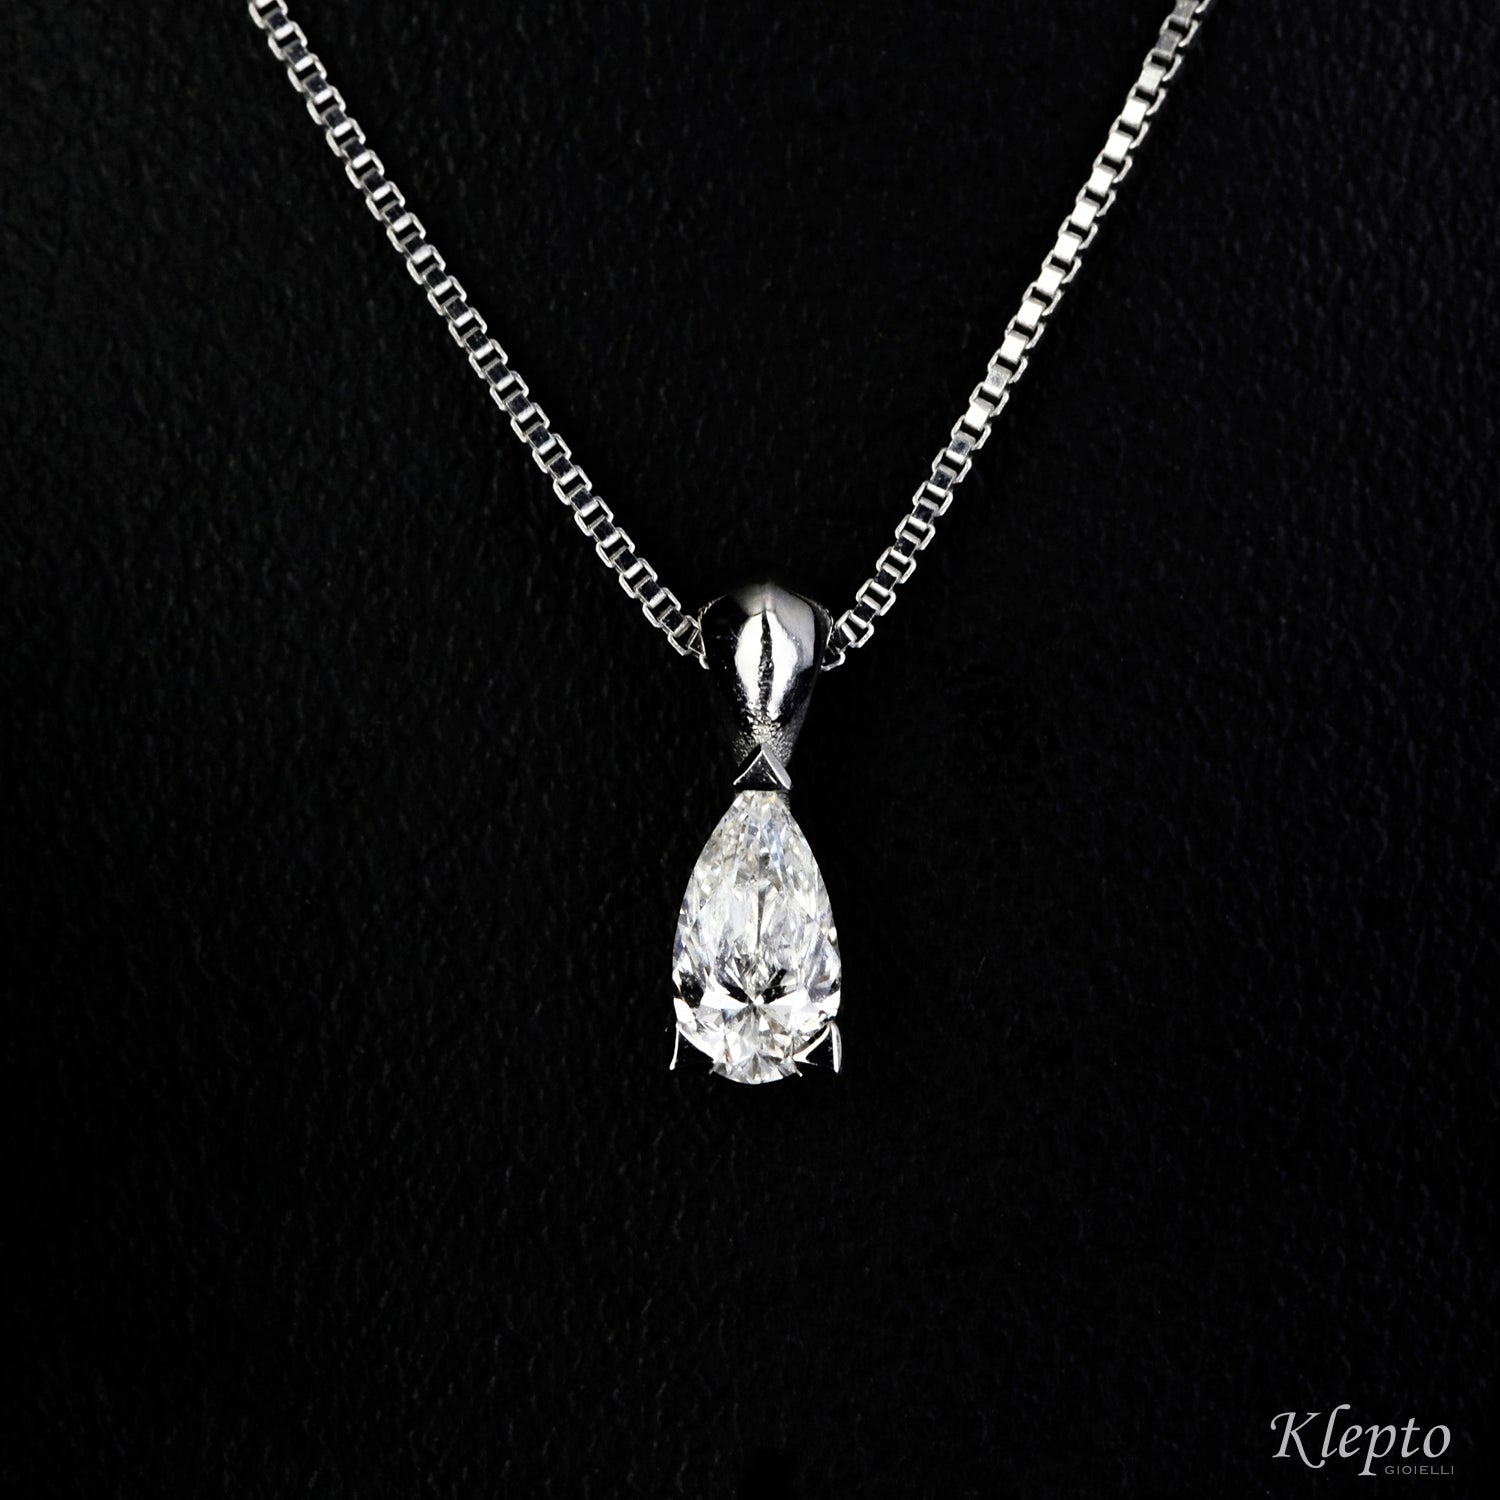 Pendant in white gold with drop cut diamond